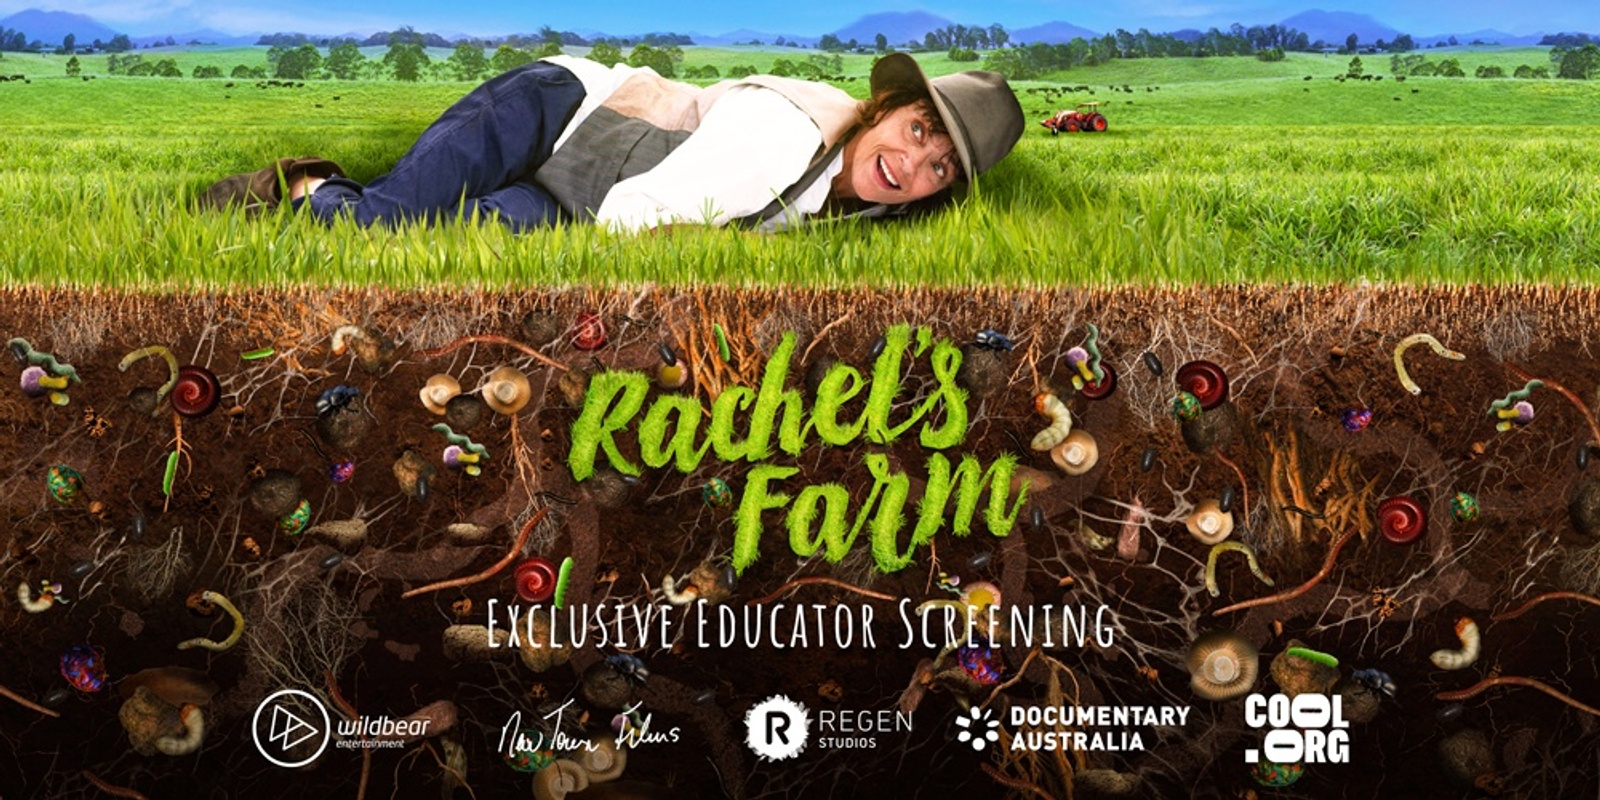 Banner image for Free Educator Screening and Q&A of 'Rachel's Farm' 14 November 2023